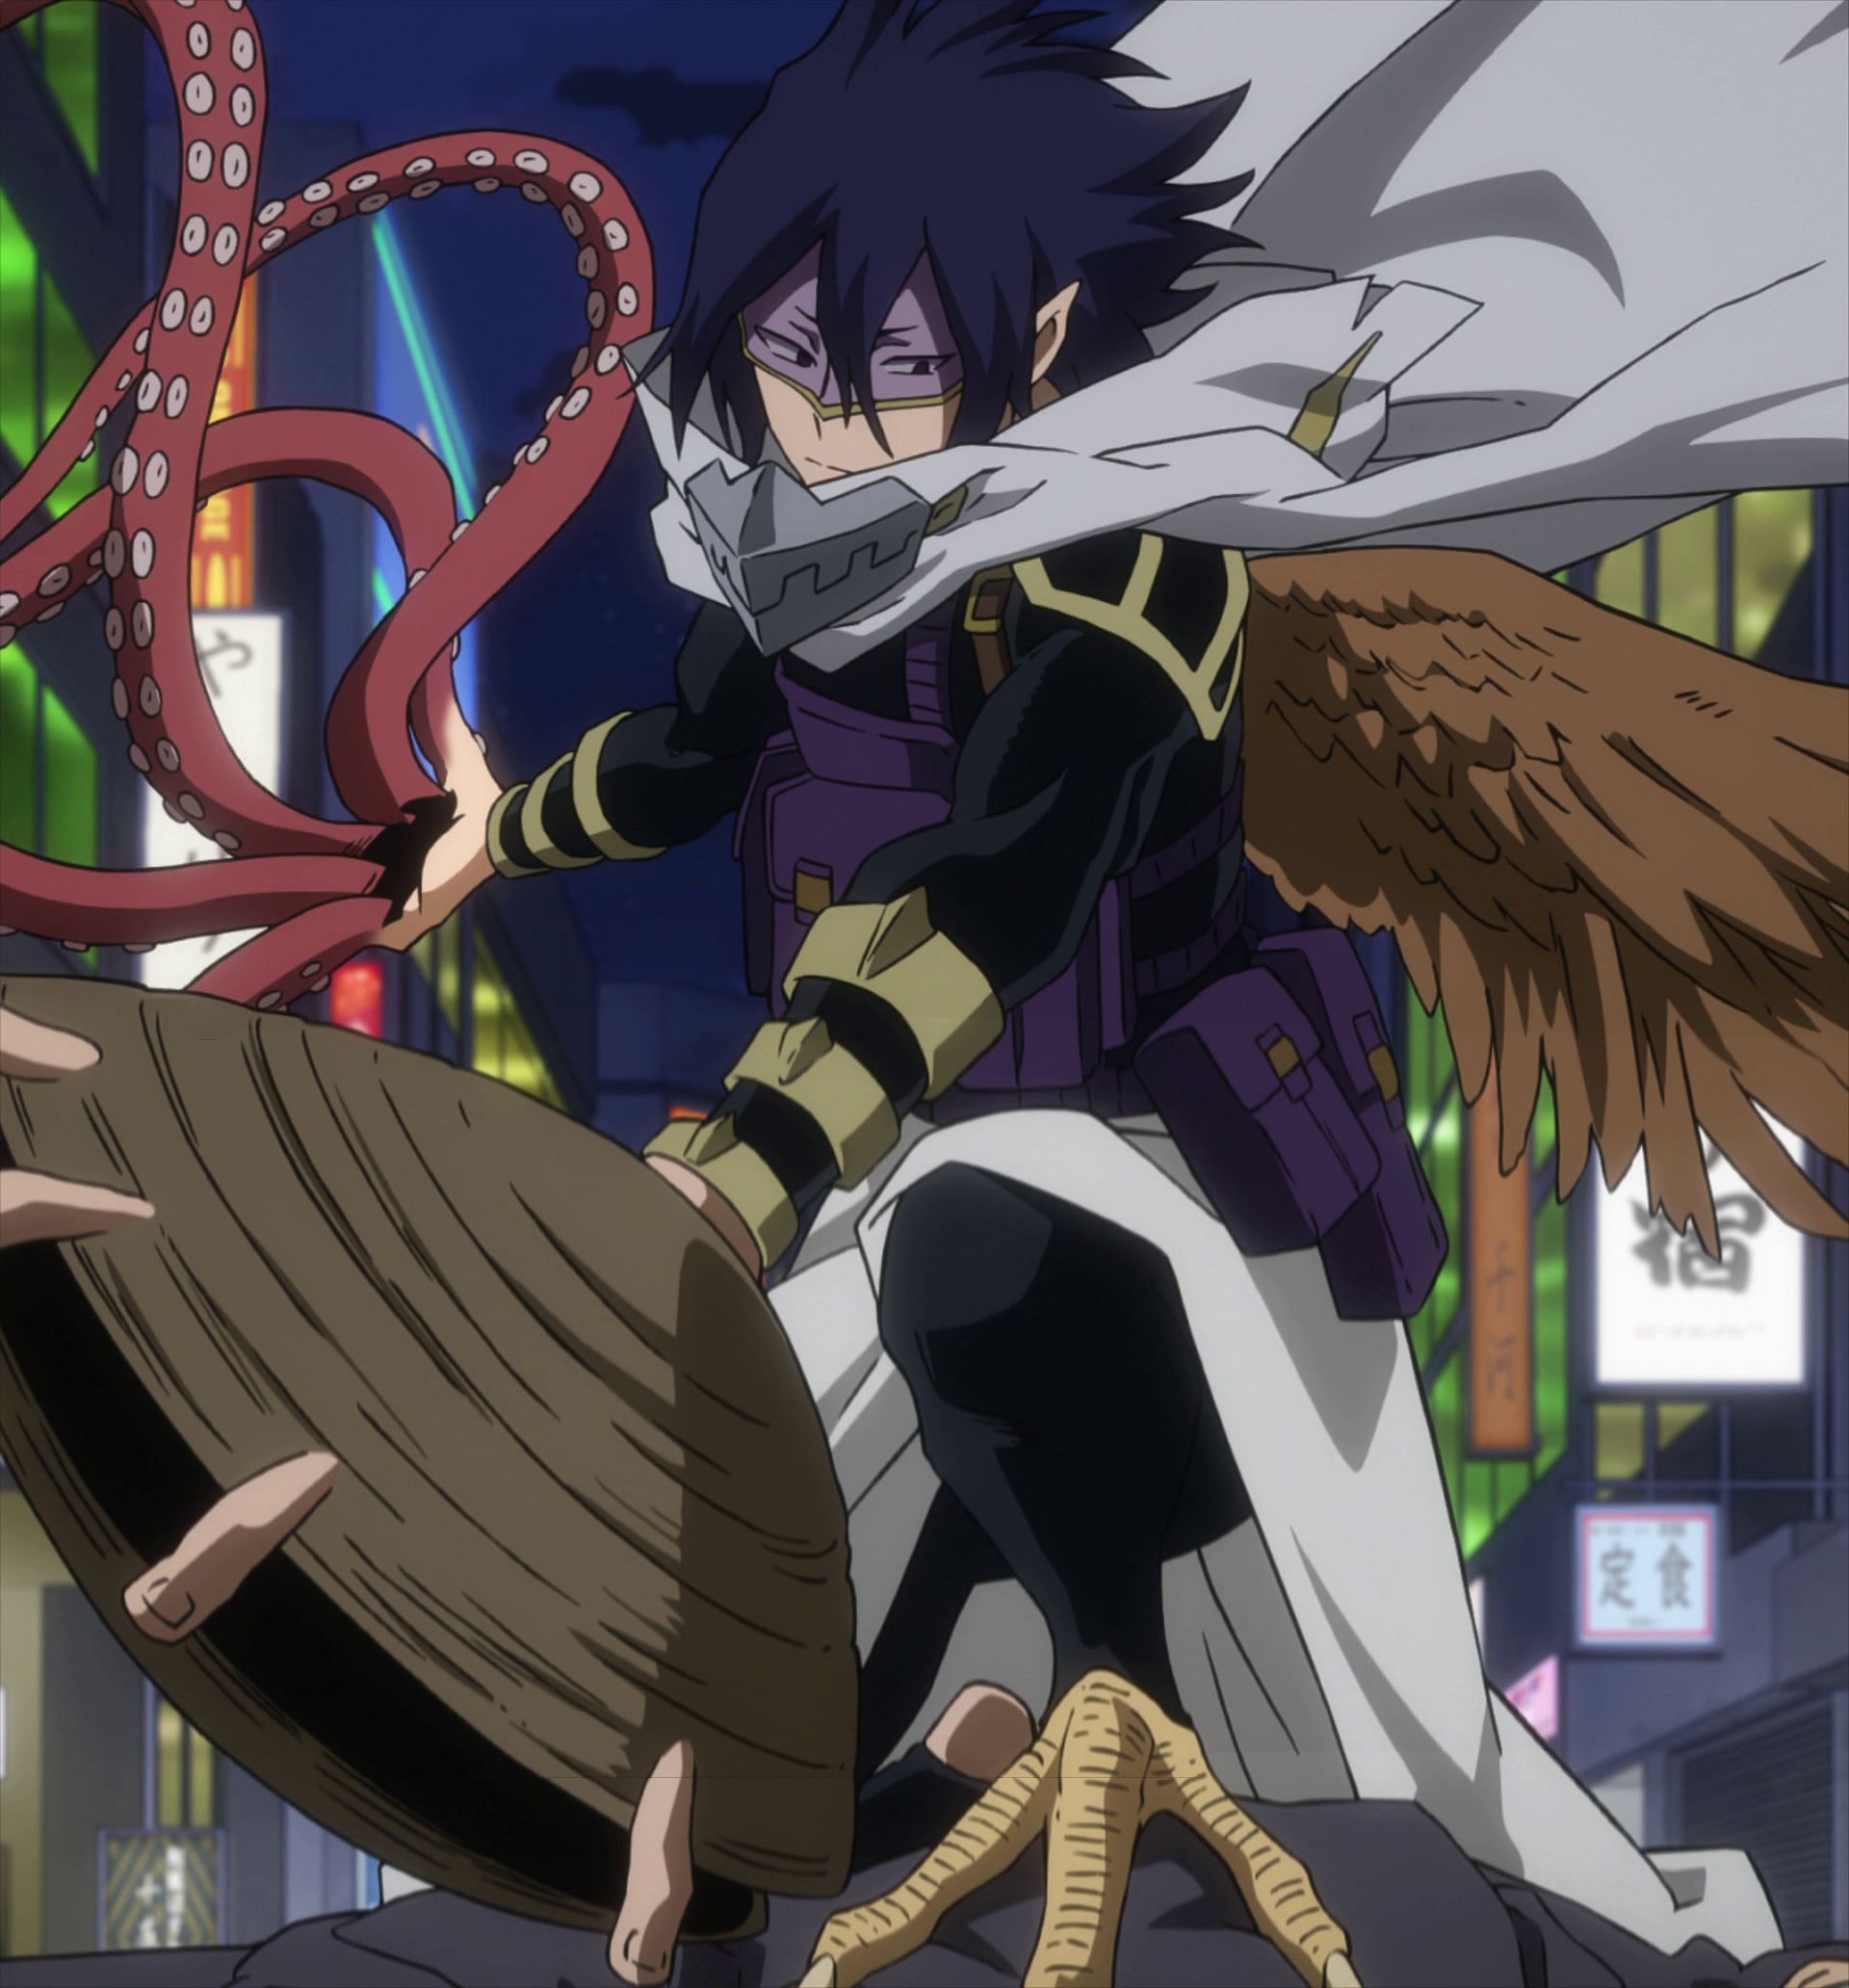 Amajiki uses Manifest to give himself wings, chicken feet, and more. (Image via Studio Bones)